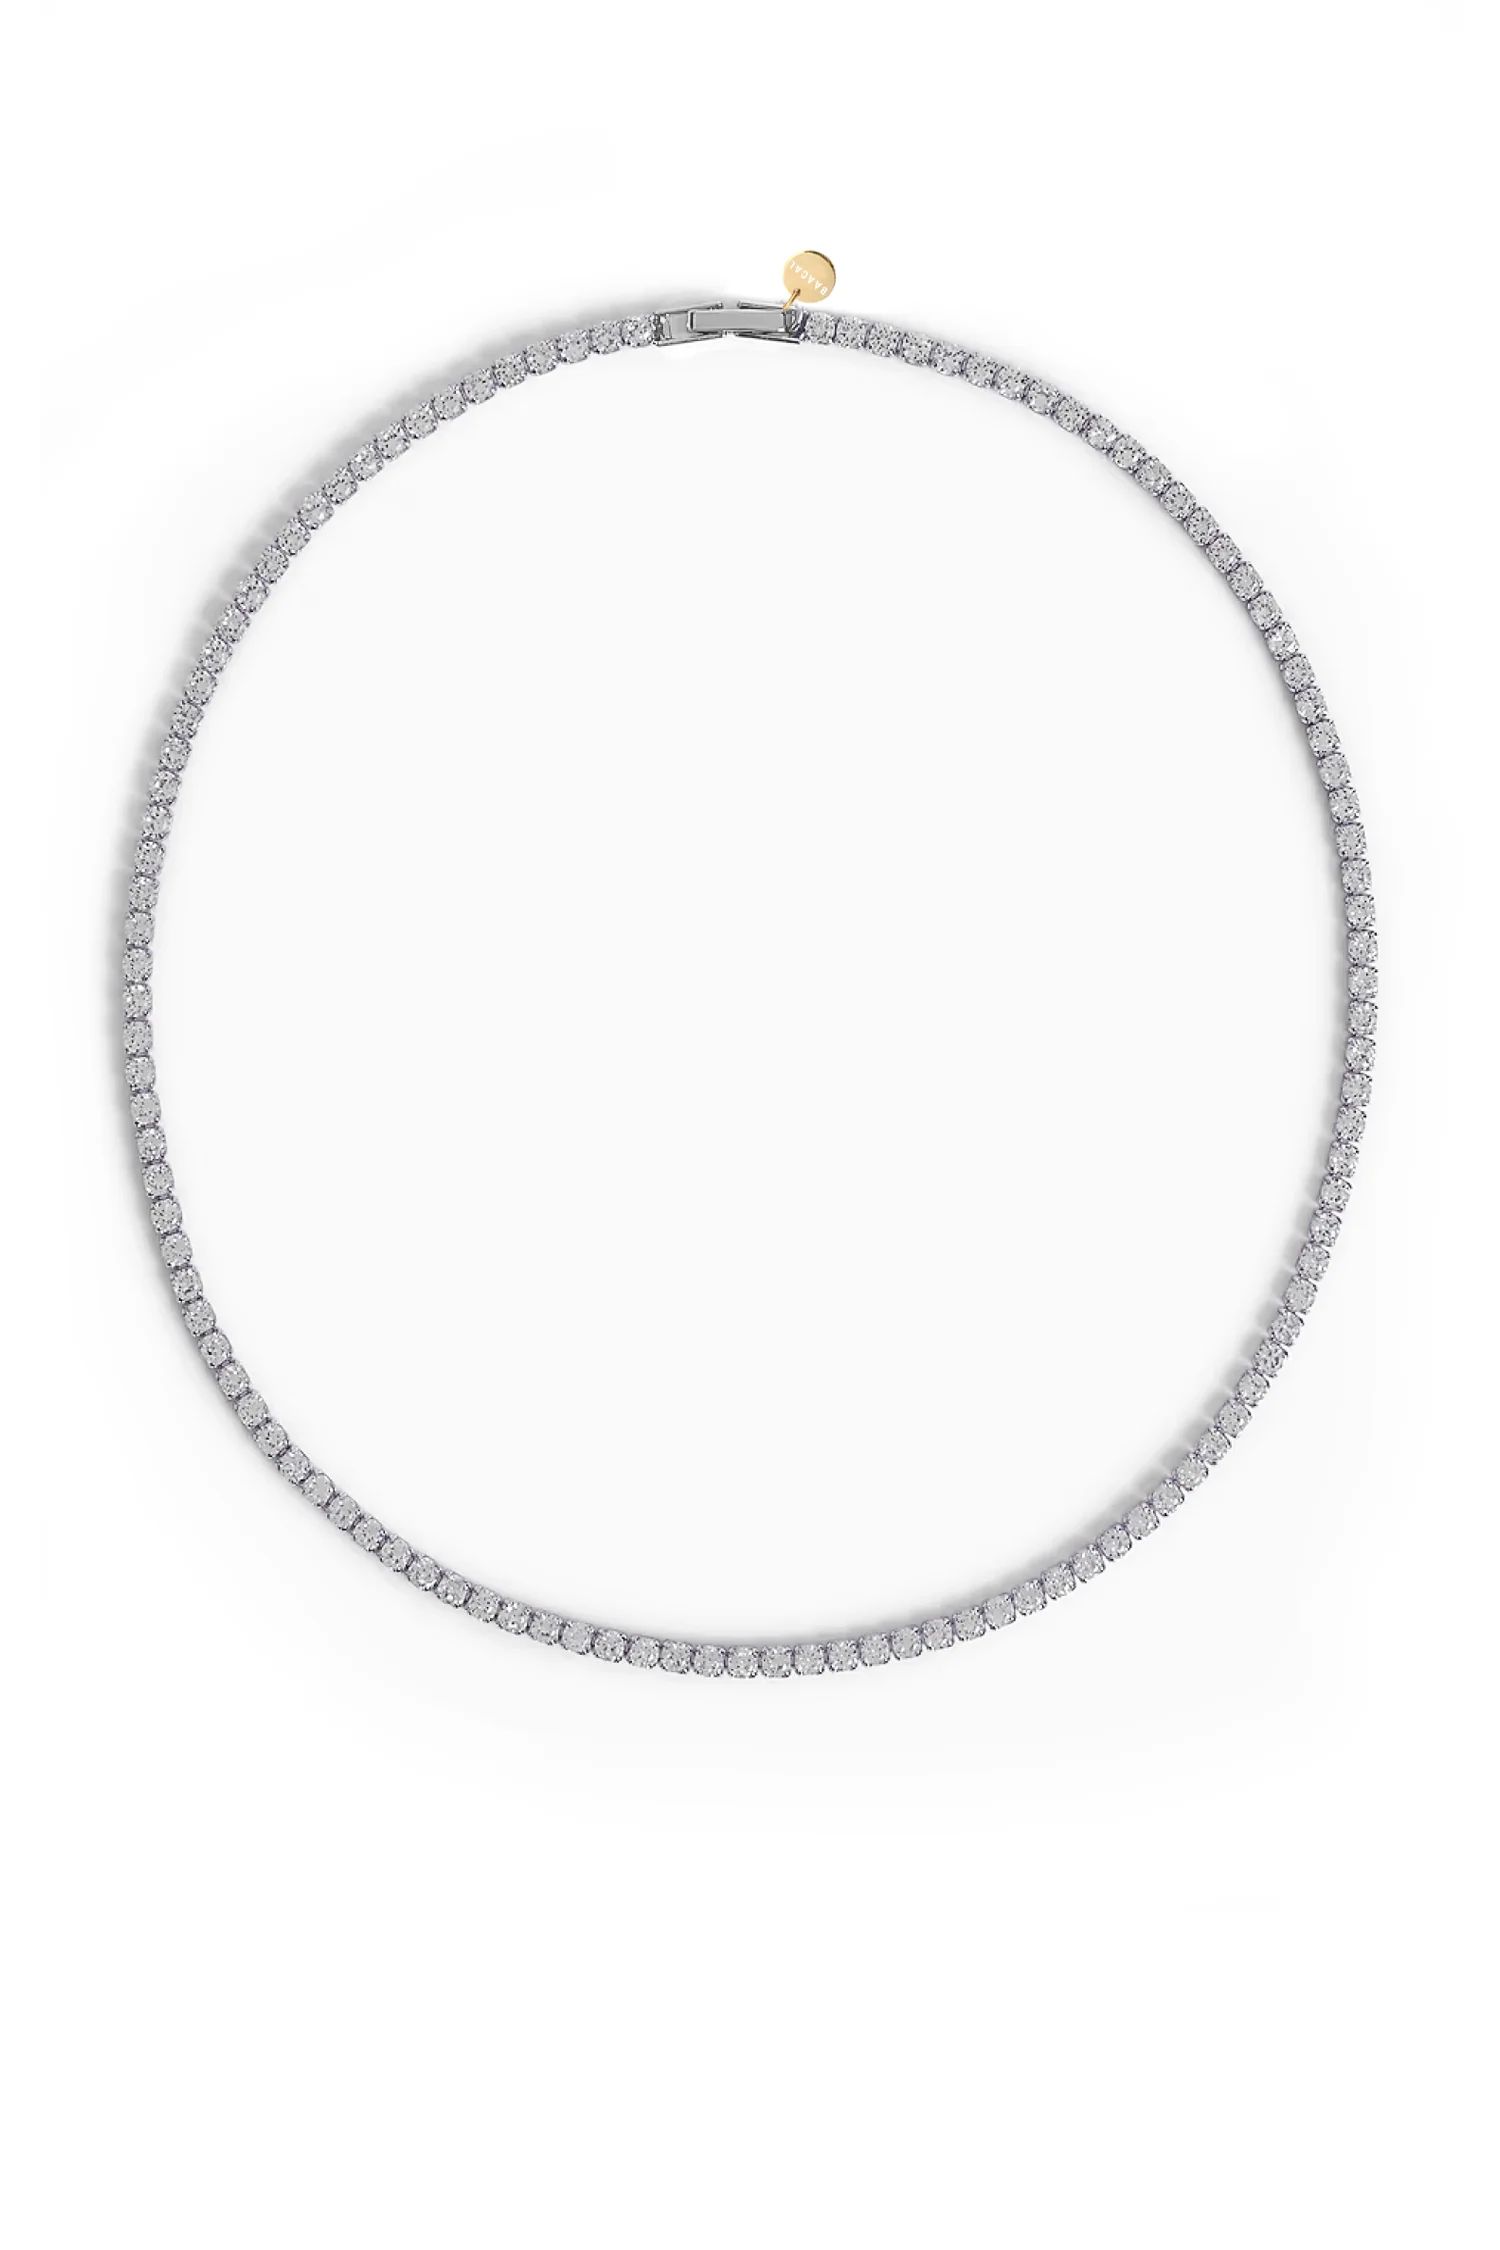 Tennis Necklace- 14K white gold plated | BAACAL Limited, LLC